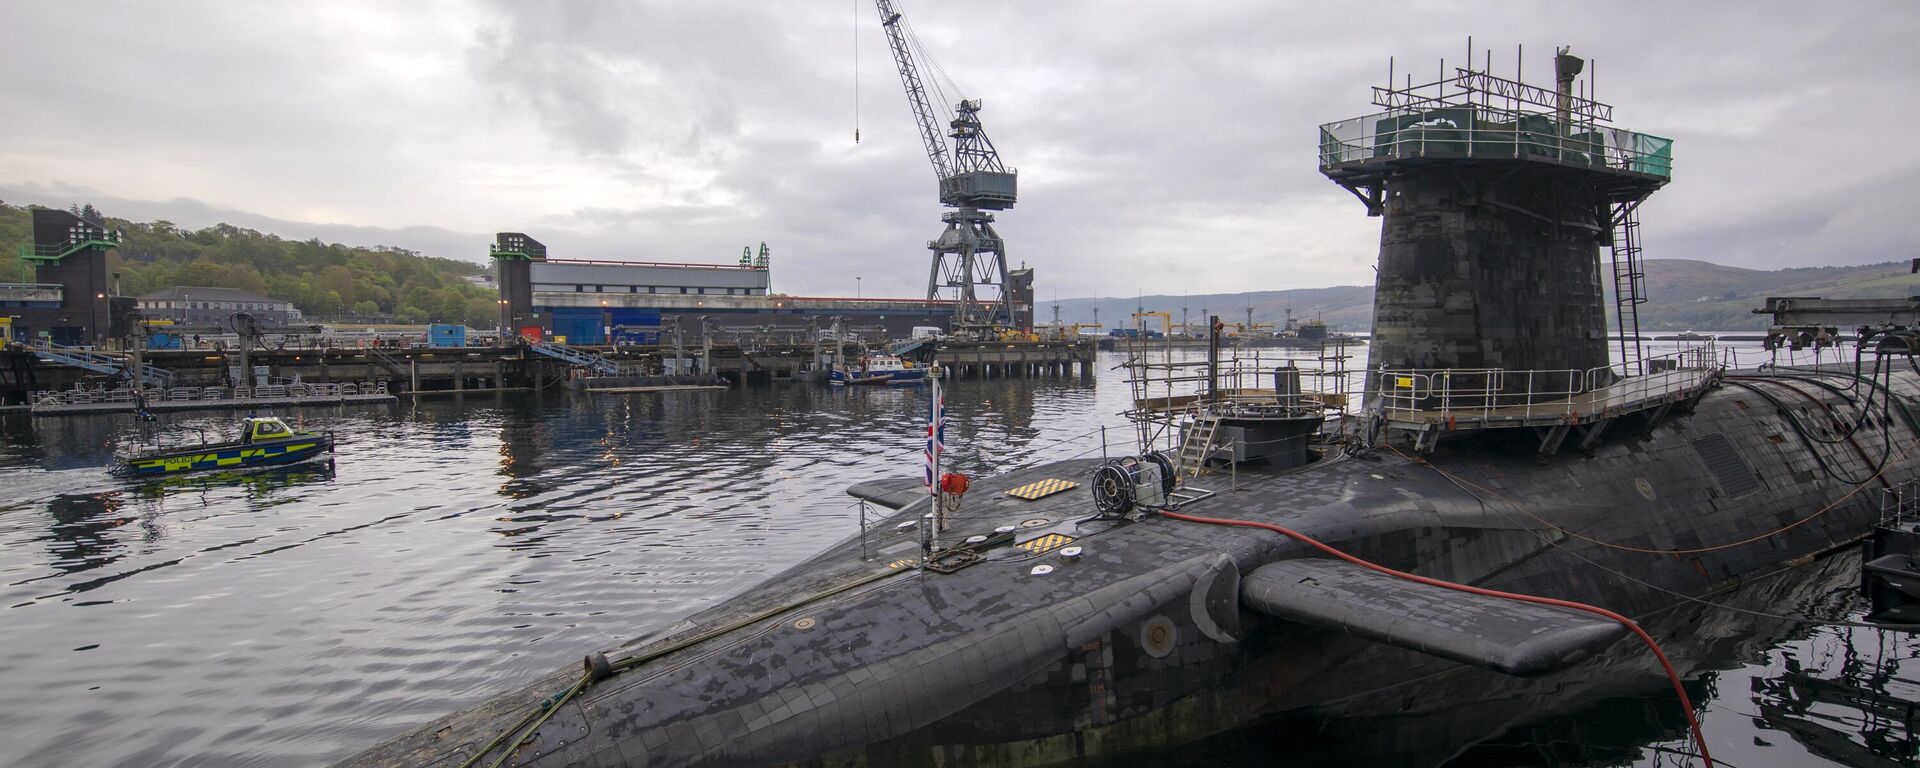 Vanguard-class submarine HMS Vigilant, one of the UK's four nuclear warhead-carrying submarines at HM Naval Base Clyde, Faslane, west of Glasgow, Scotland on April 29, 2019 - Sputnik International, 1920, 31.01.2023